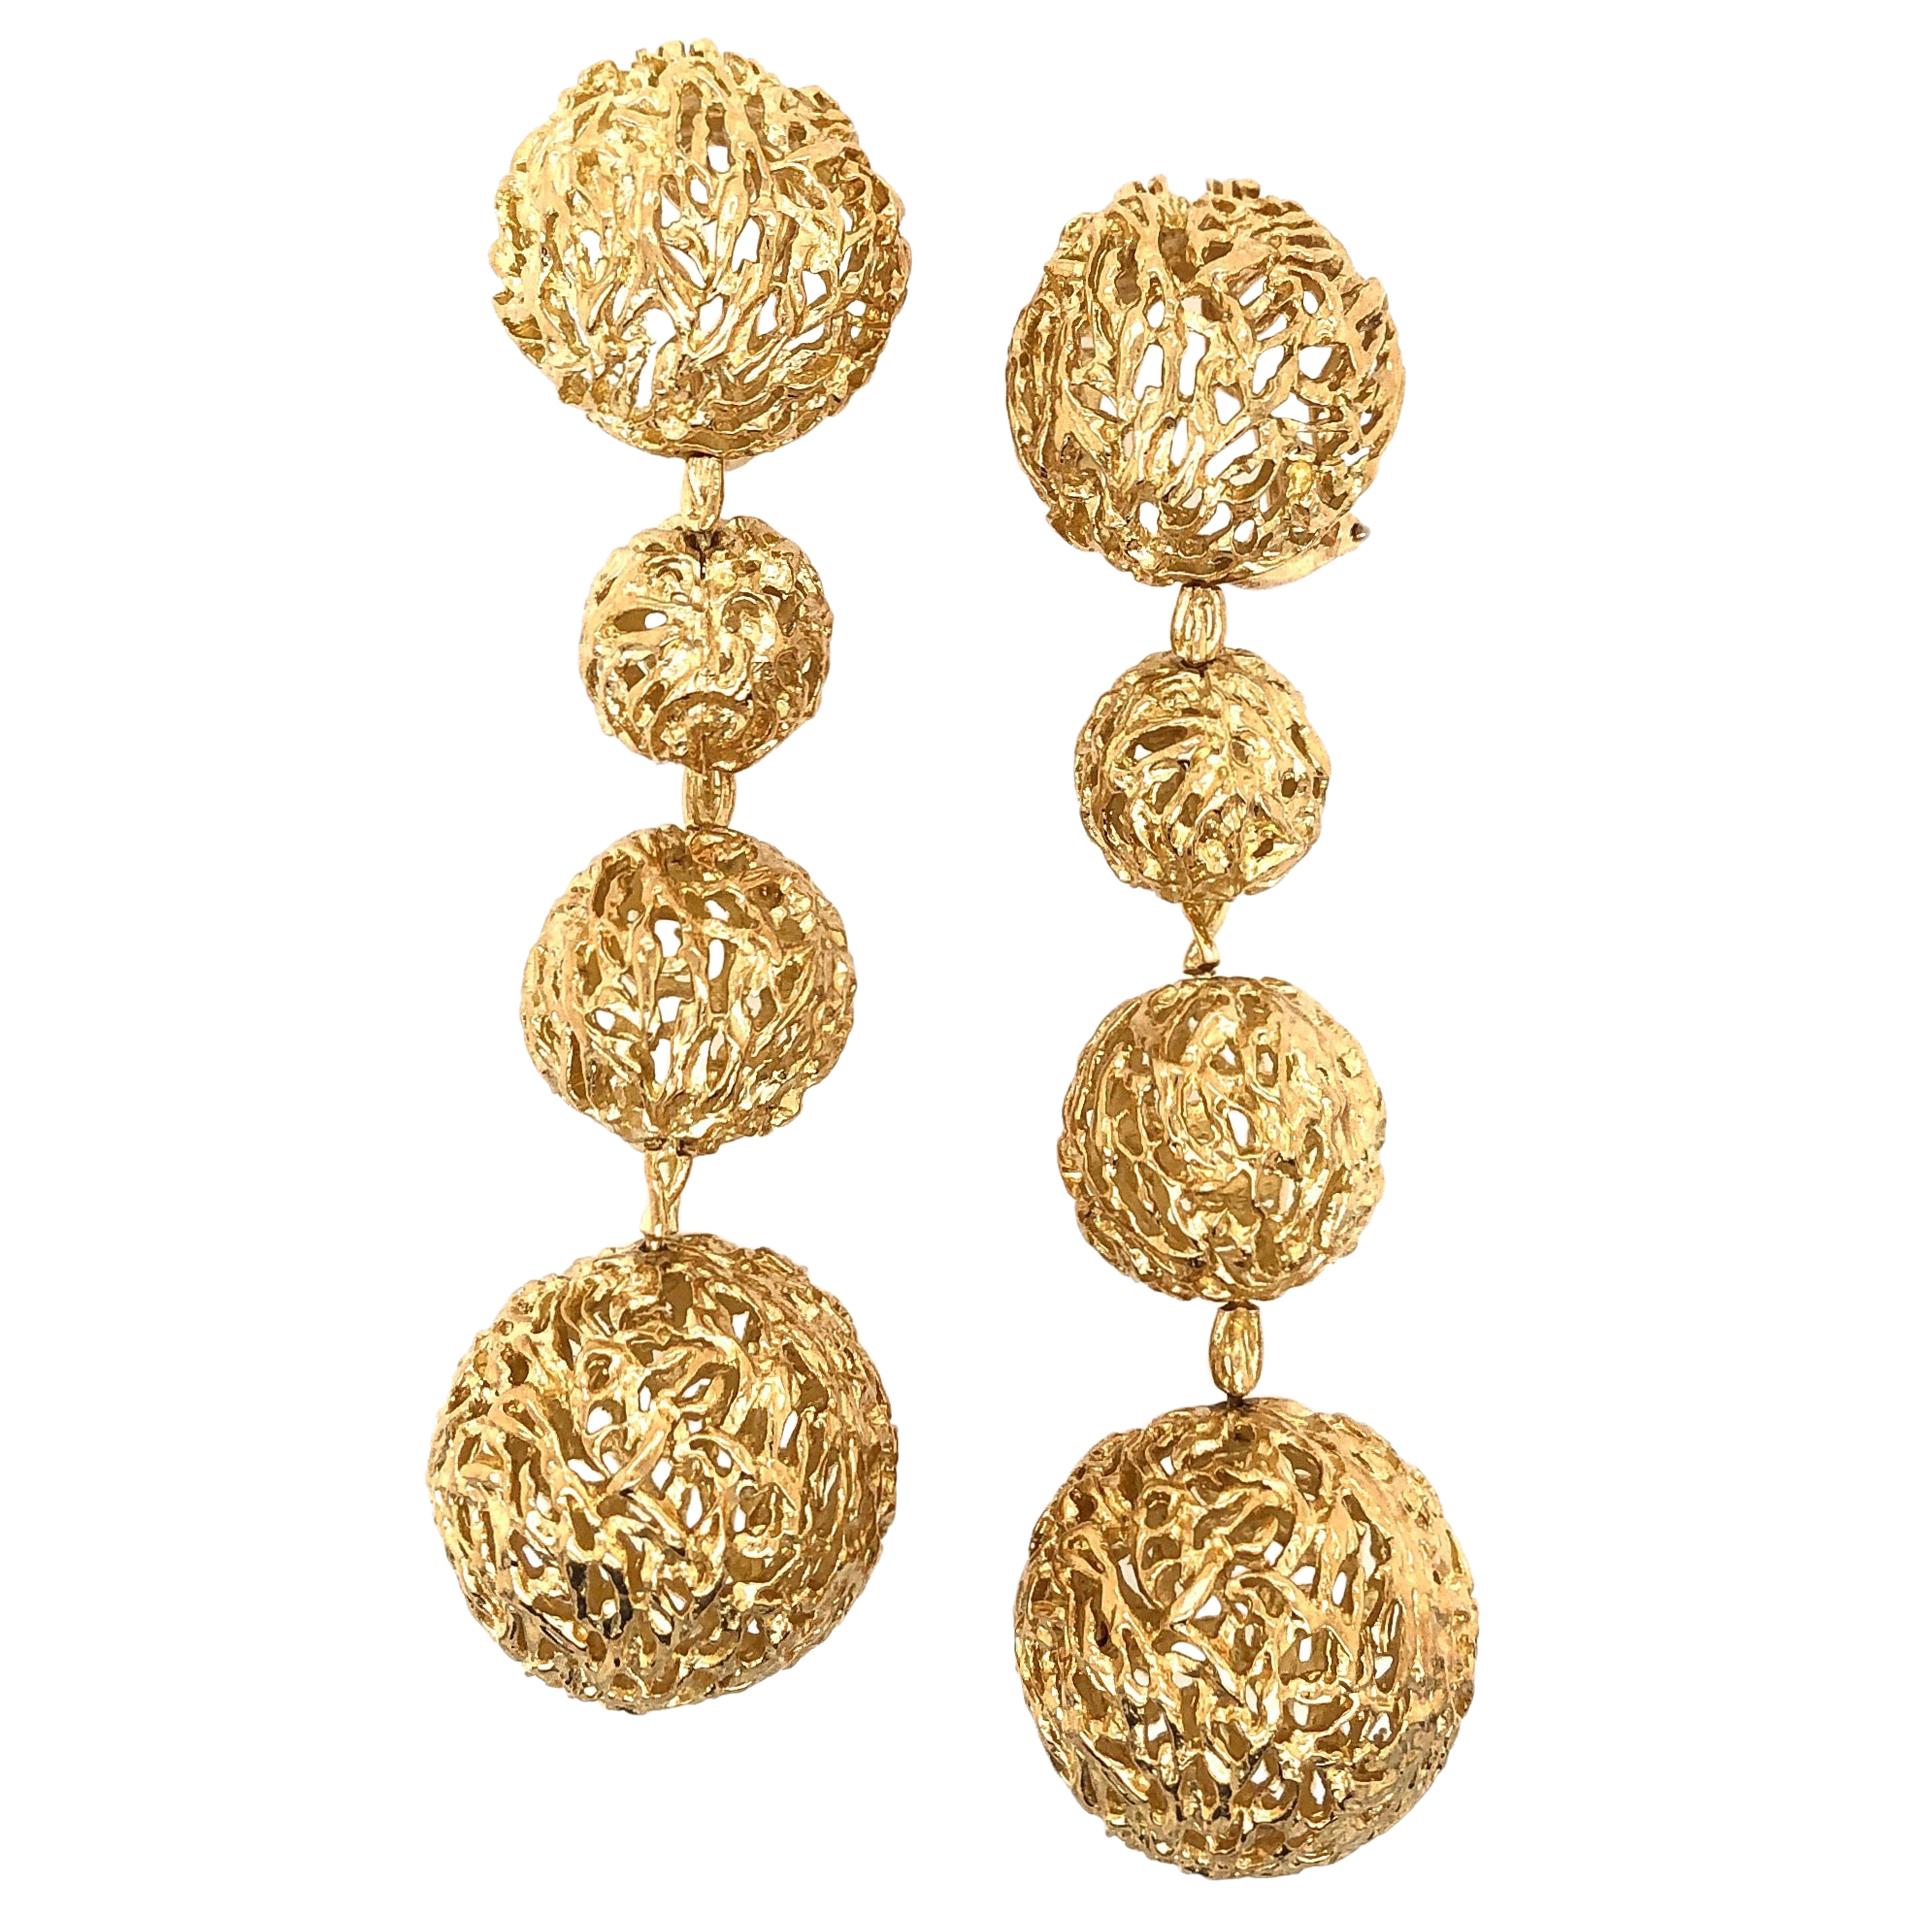 Articulated Gold 1960s Dangle Ball Earrings